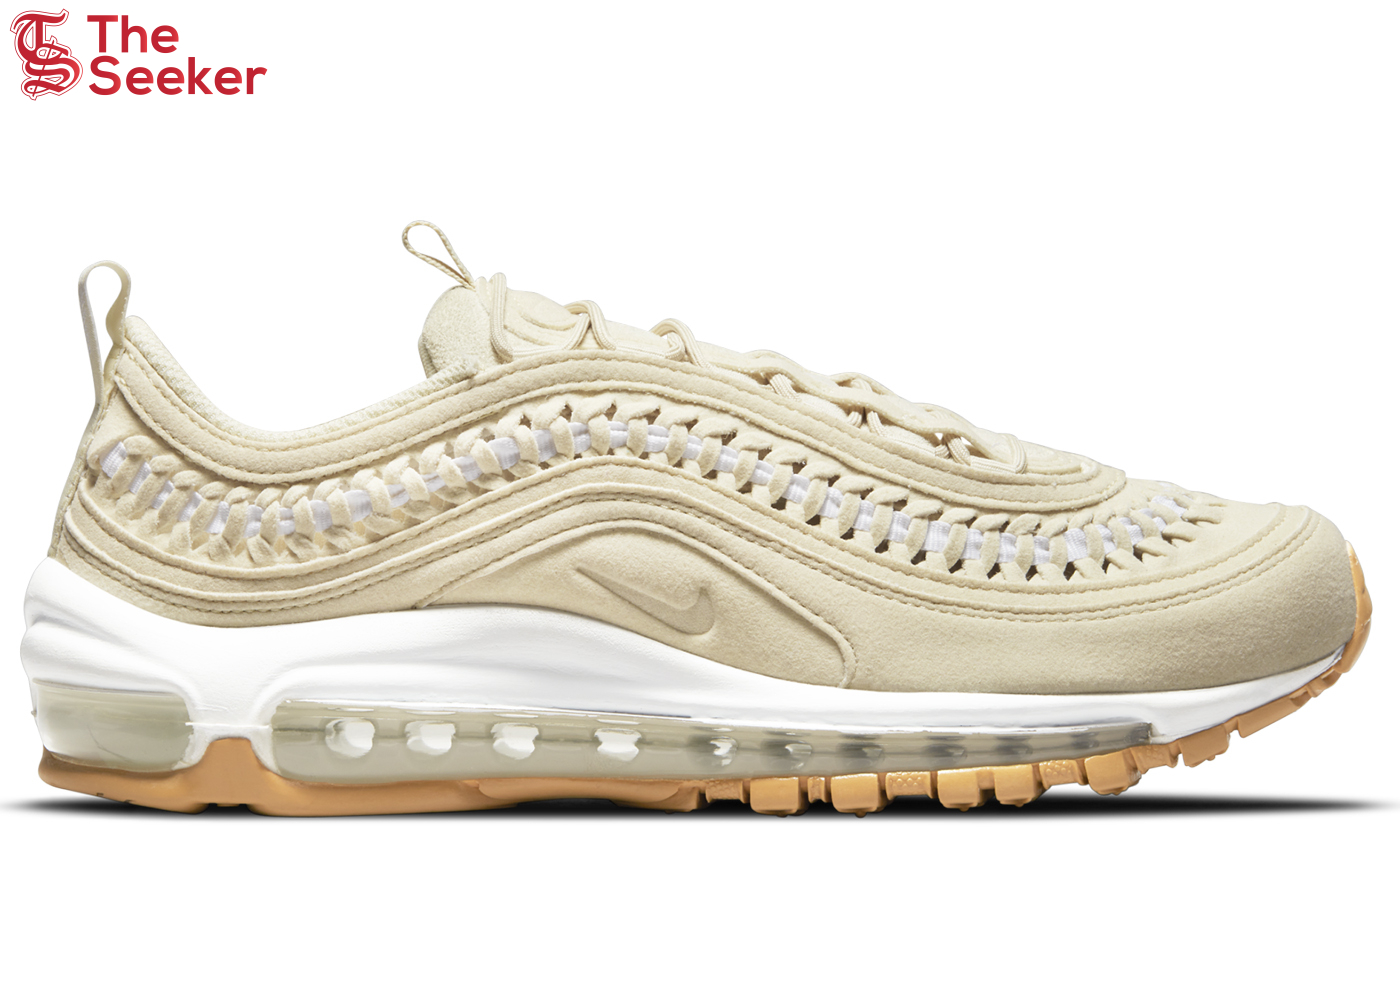 Nike Air Max 97 LX Woven Fossil (Women's)